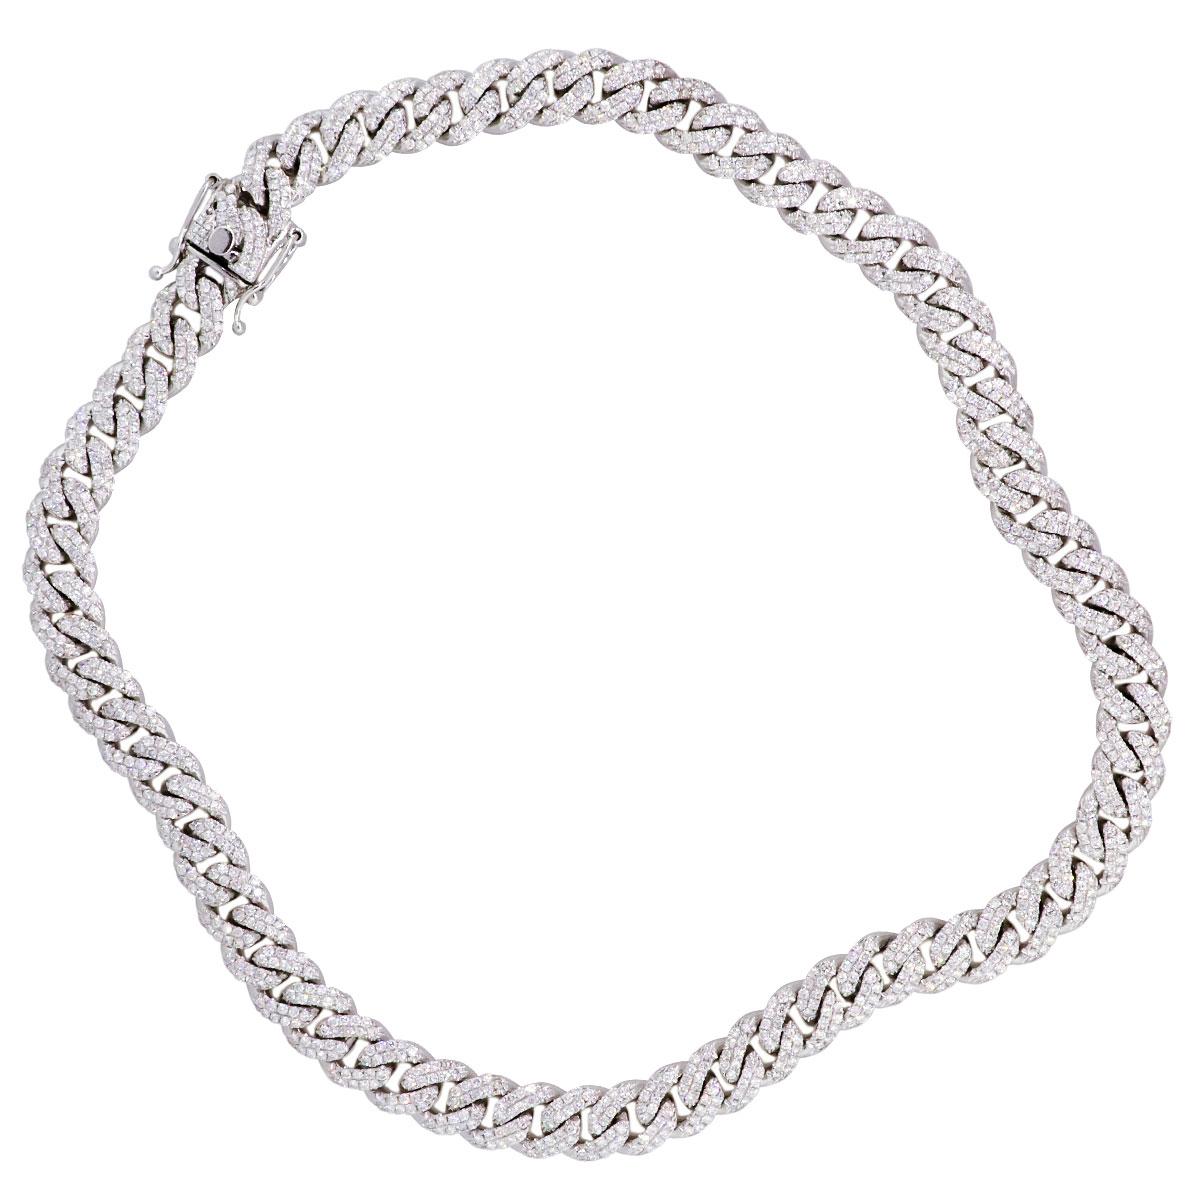 Material: 14k white gold
Diamond Details: Approx. 15.37ctw of round cut diamonds. Diamonds are G/H in color and VS in clarity
Measurements: Necklace measures 18.25″ in length.
Fastening: Tongue in box clasp with double safety latch
Item Weight: 116g